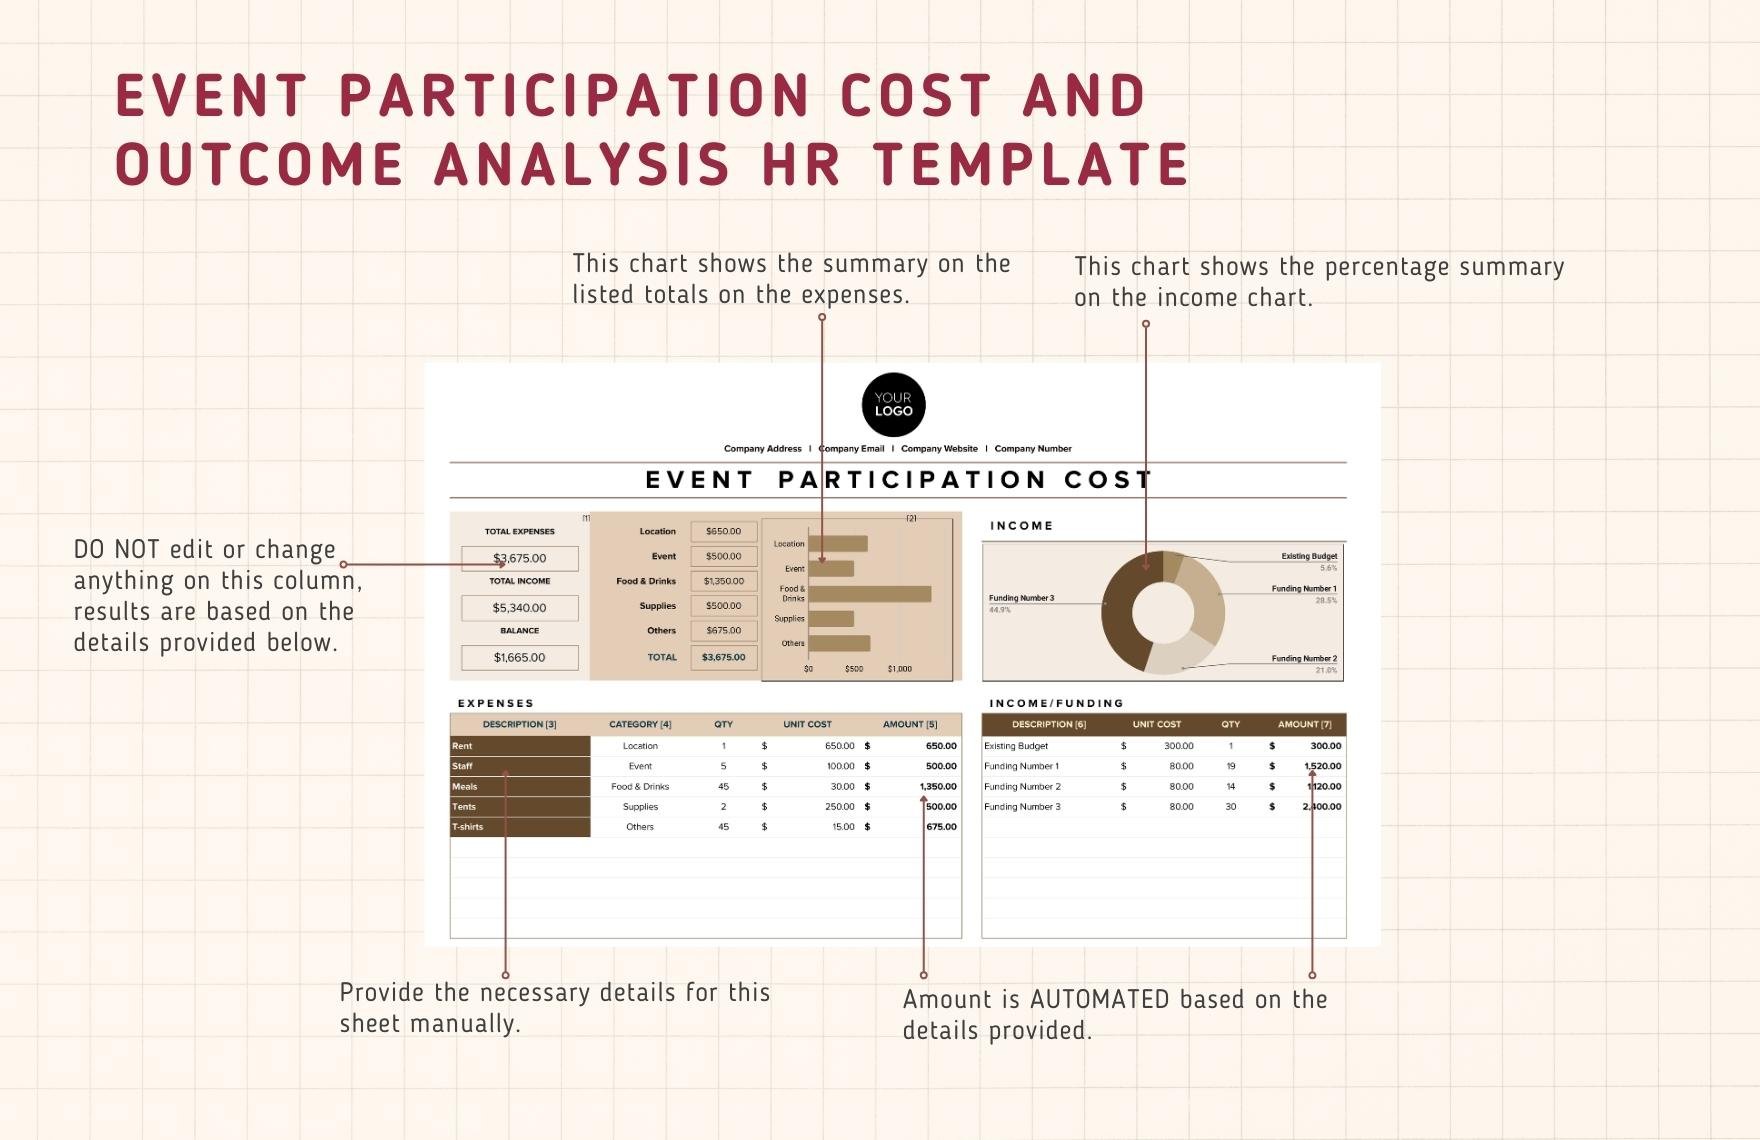 Event Participation Cost and Outcome Analysis HR Template